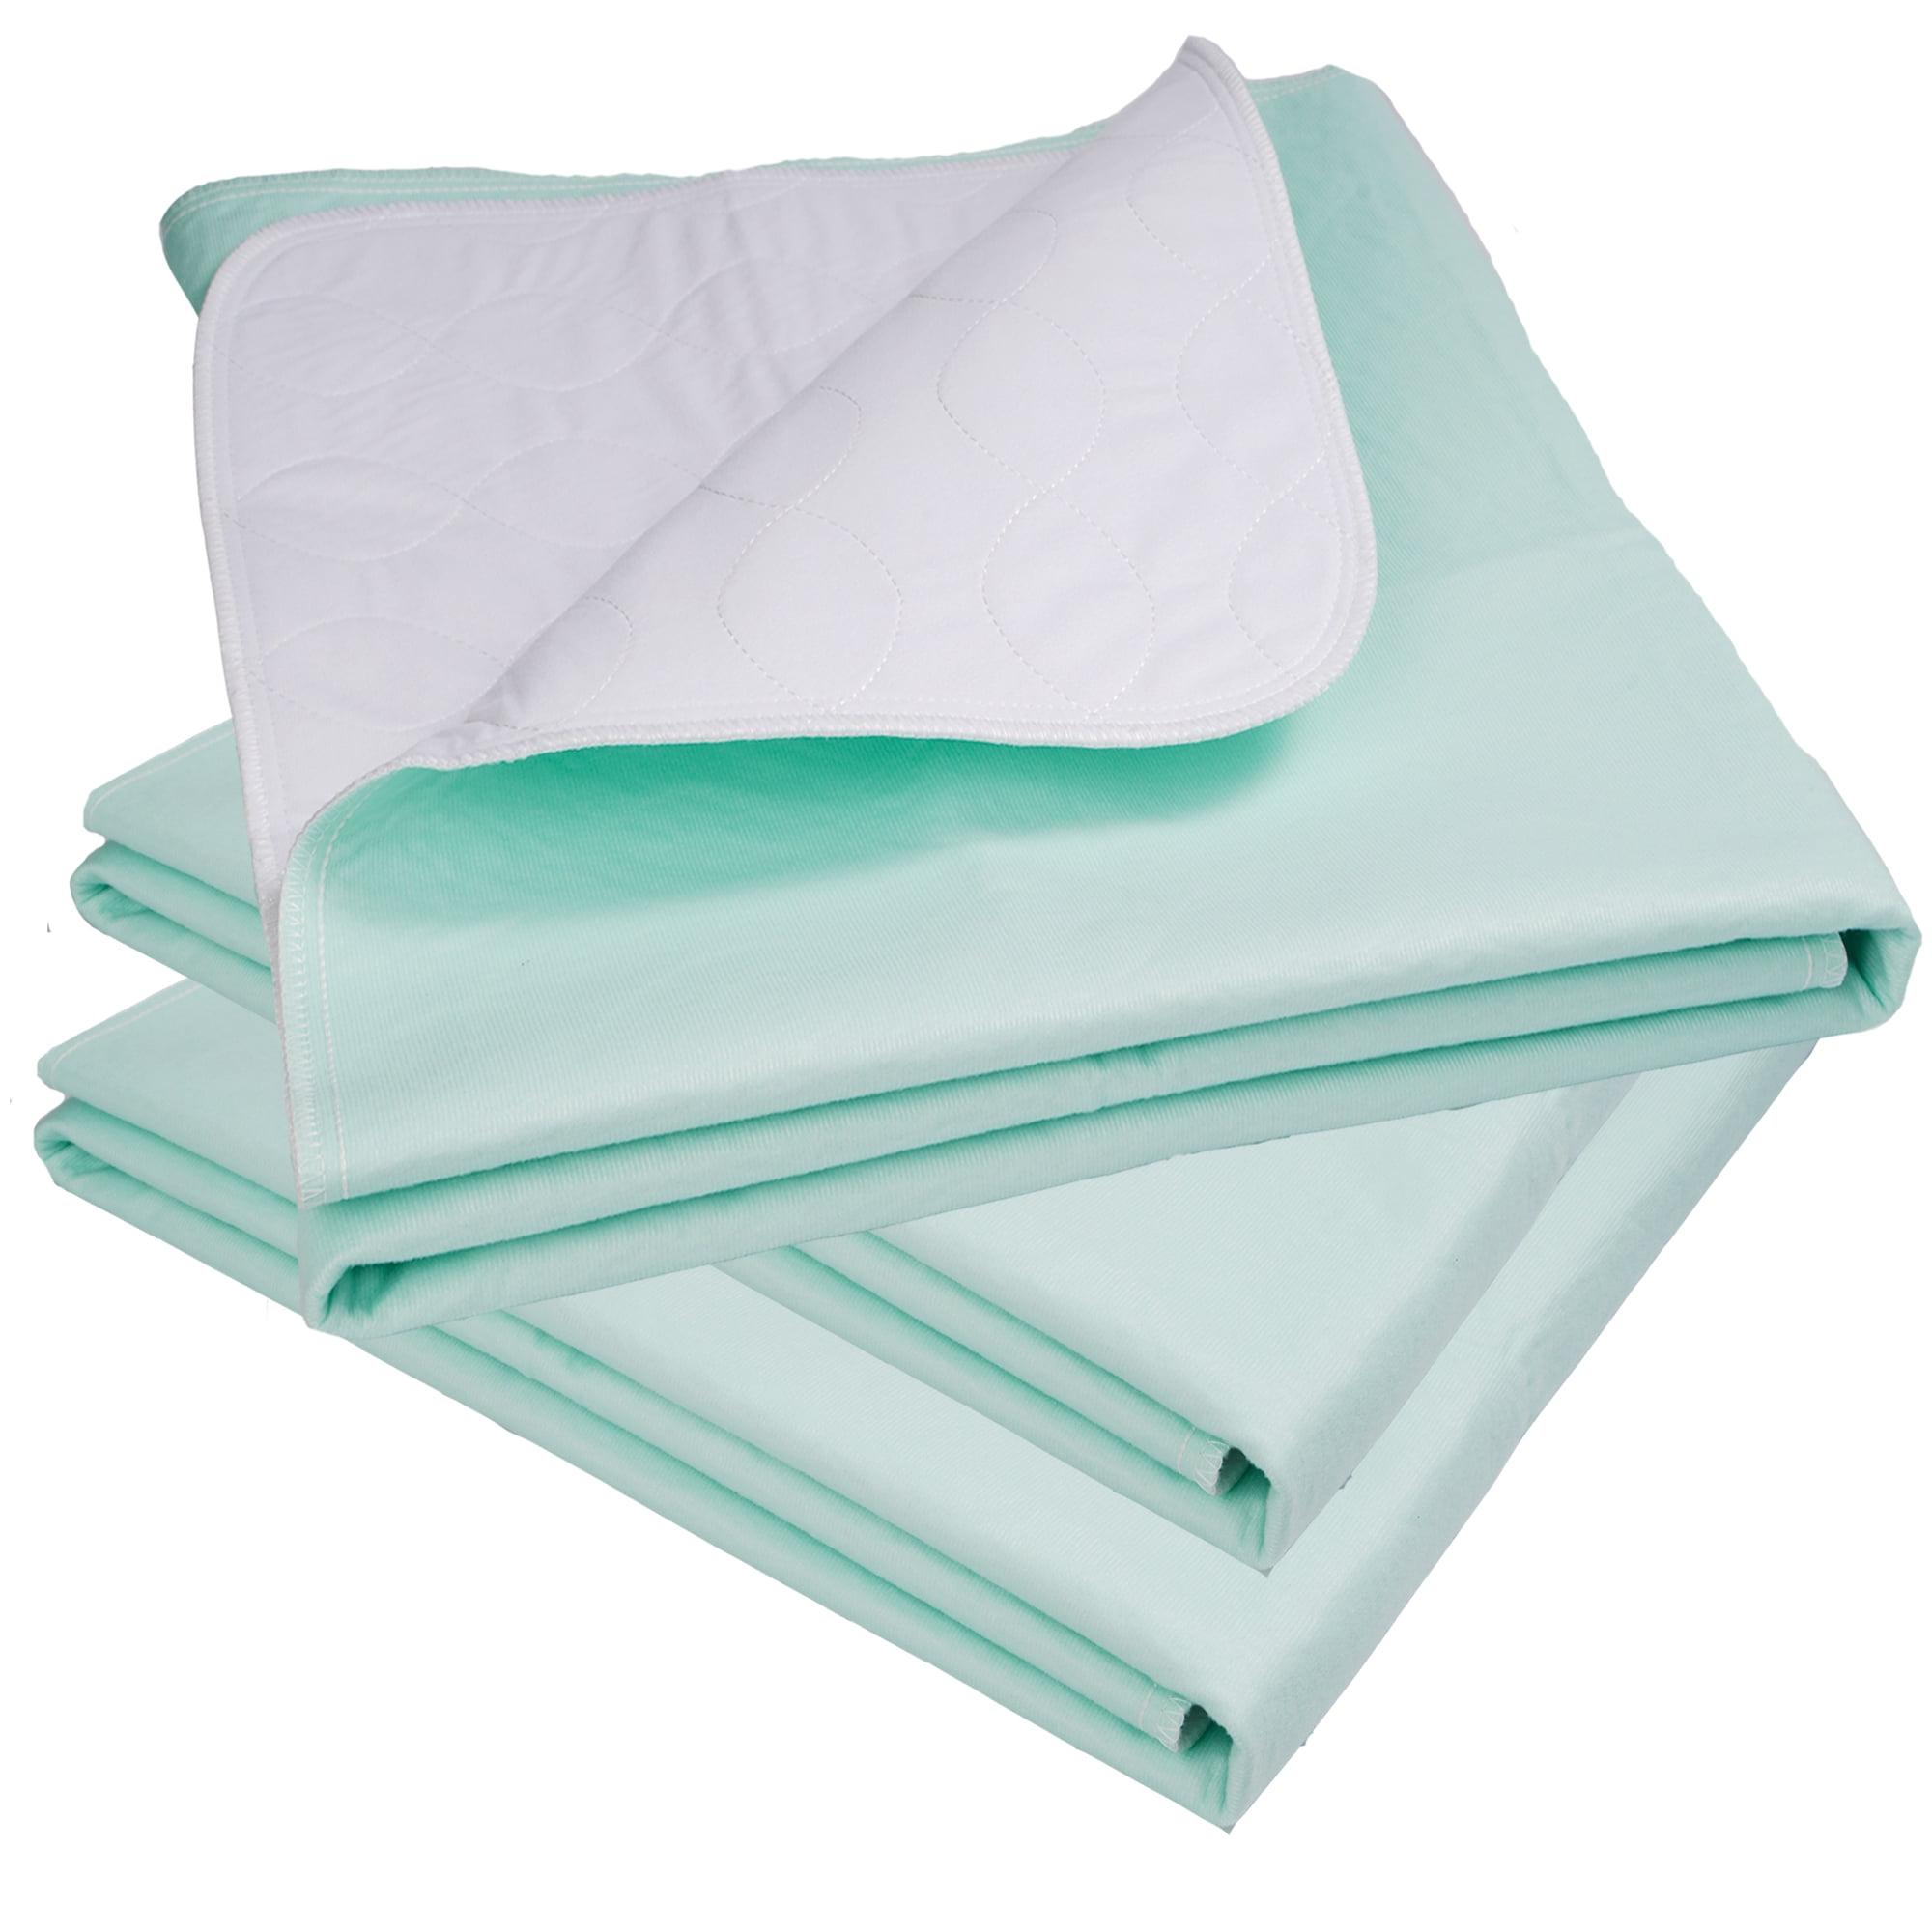 RMS Ultra Soft 4-Layer Washable and Reusable Incontinence Bed Underpads, 18x24